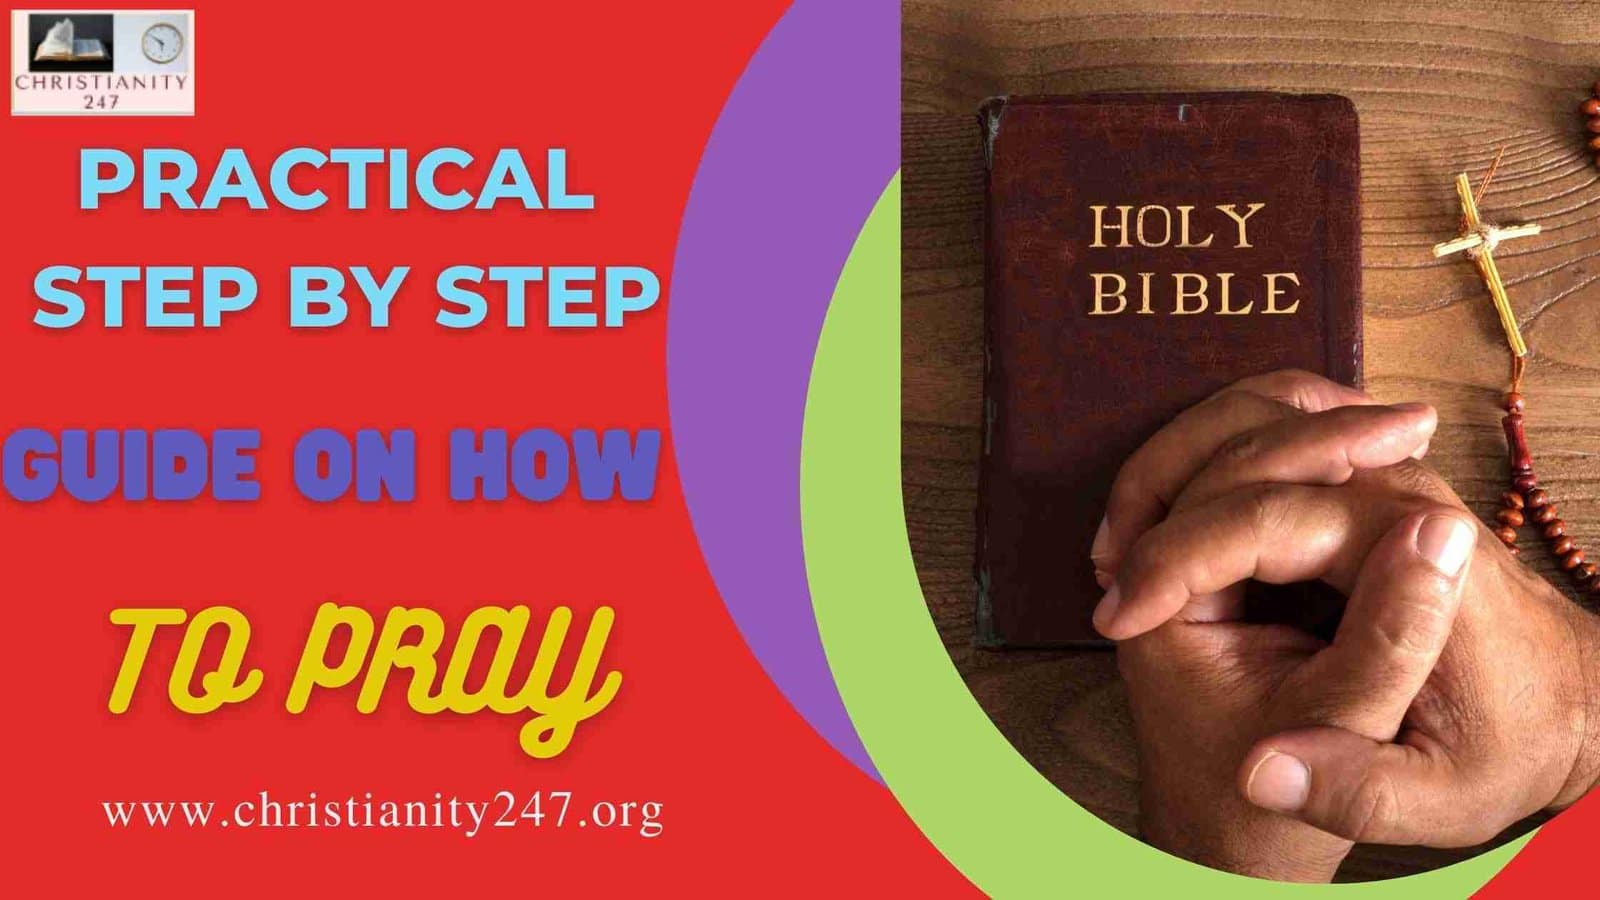 You are currently viewing PRACTICAL STEP BY STEP GUIDE ON HOW TO PRAY: